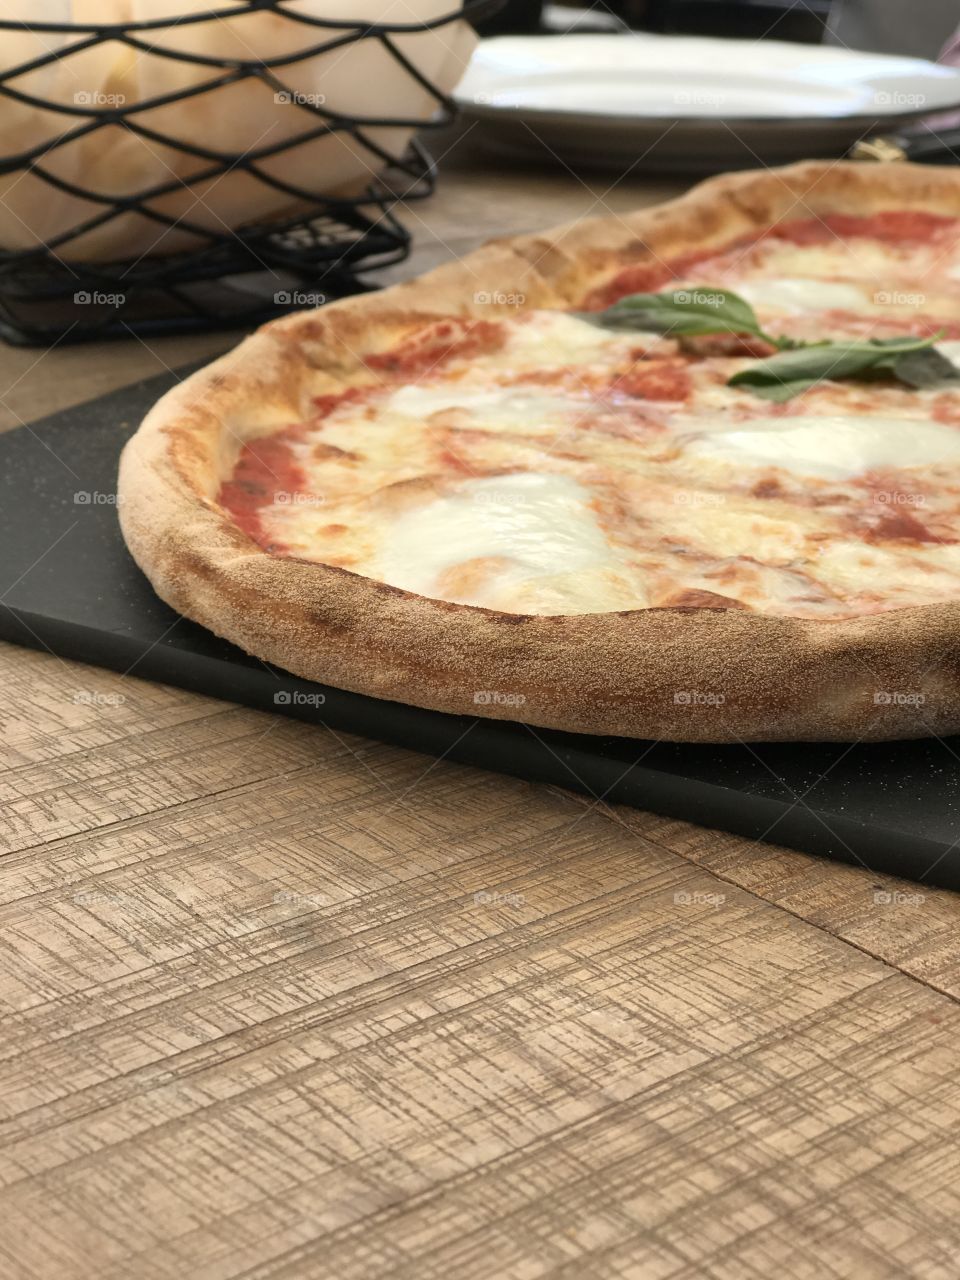 Fresh Italian pizza on a wood table. Delicious Pizza Margherita